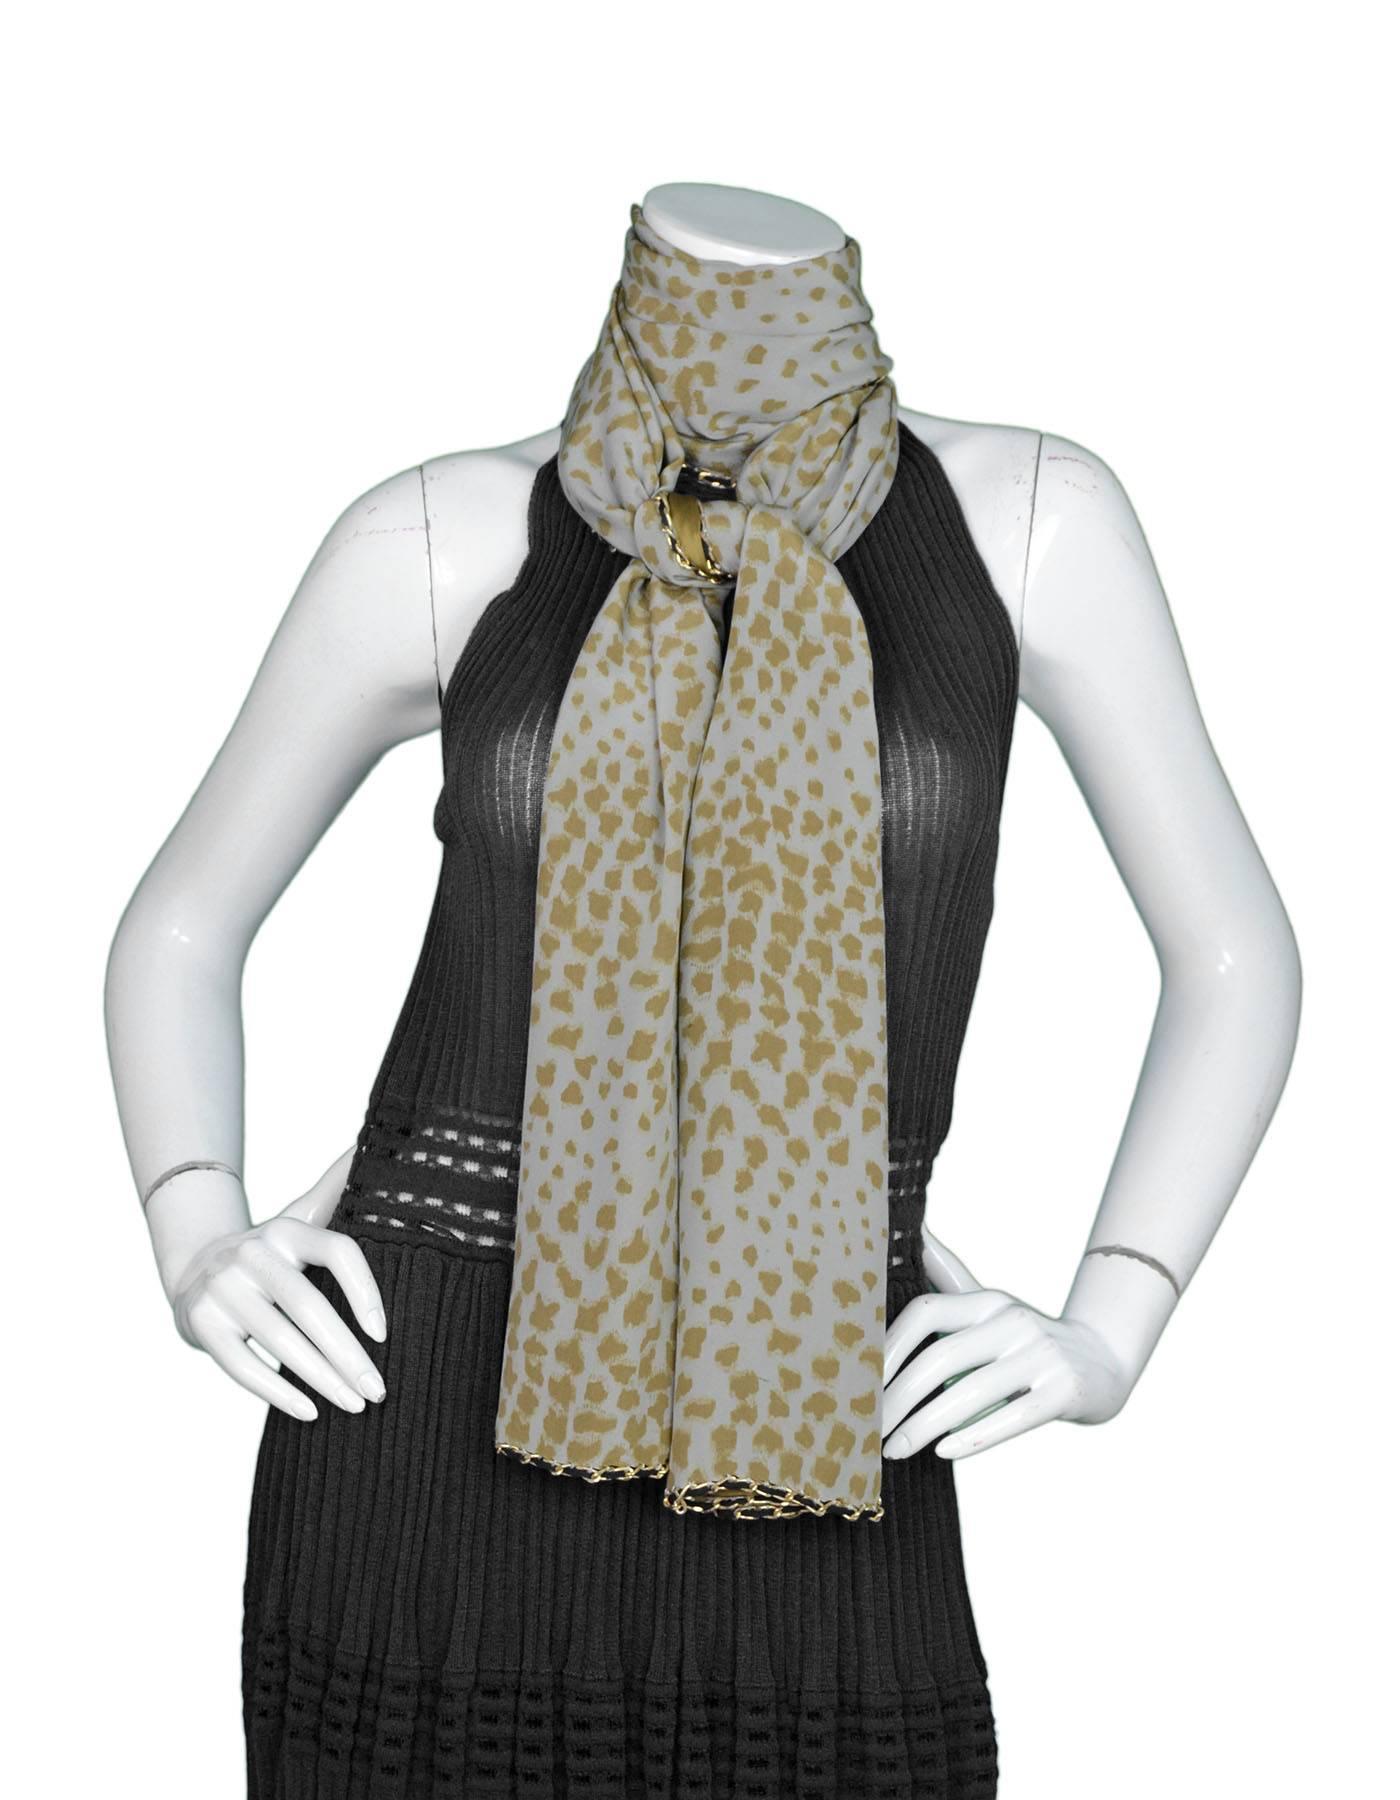 Chloe Animal Print Silk Large Scarf 
Features goldtone chain link trim throughout

Made In: India
Color: Grey and army green
Hardware: Goldtone
Composition: 100% silk
Overall Condition: Excellent pre-owned condition
Measurements: 
Length: